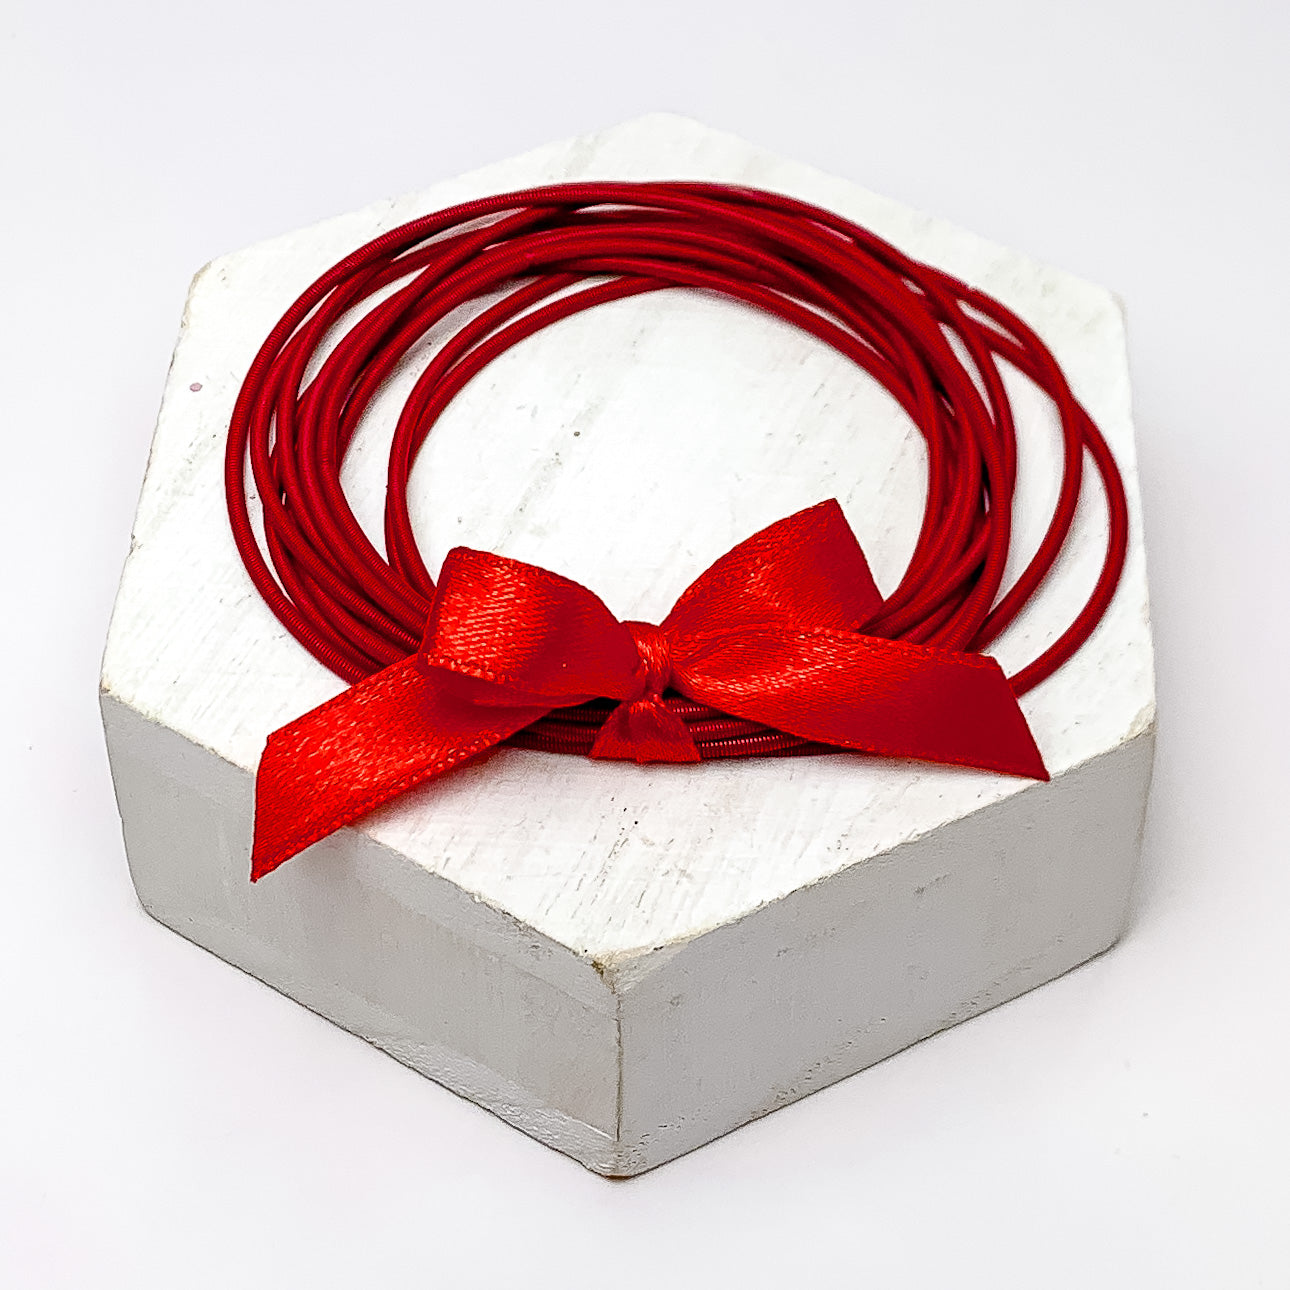 Guitar String Bracelets with Bow in Red. Pictured on a white background sitting on top of a white block.